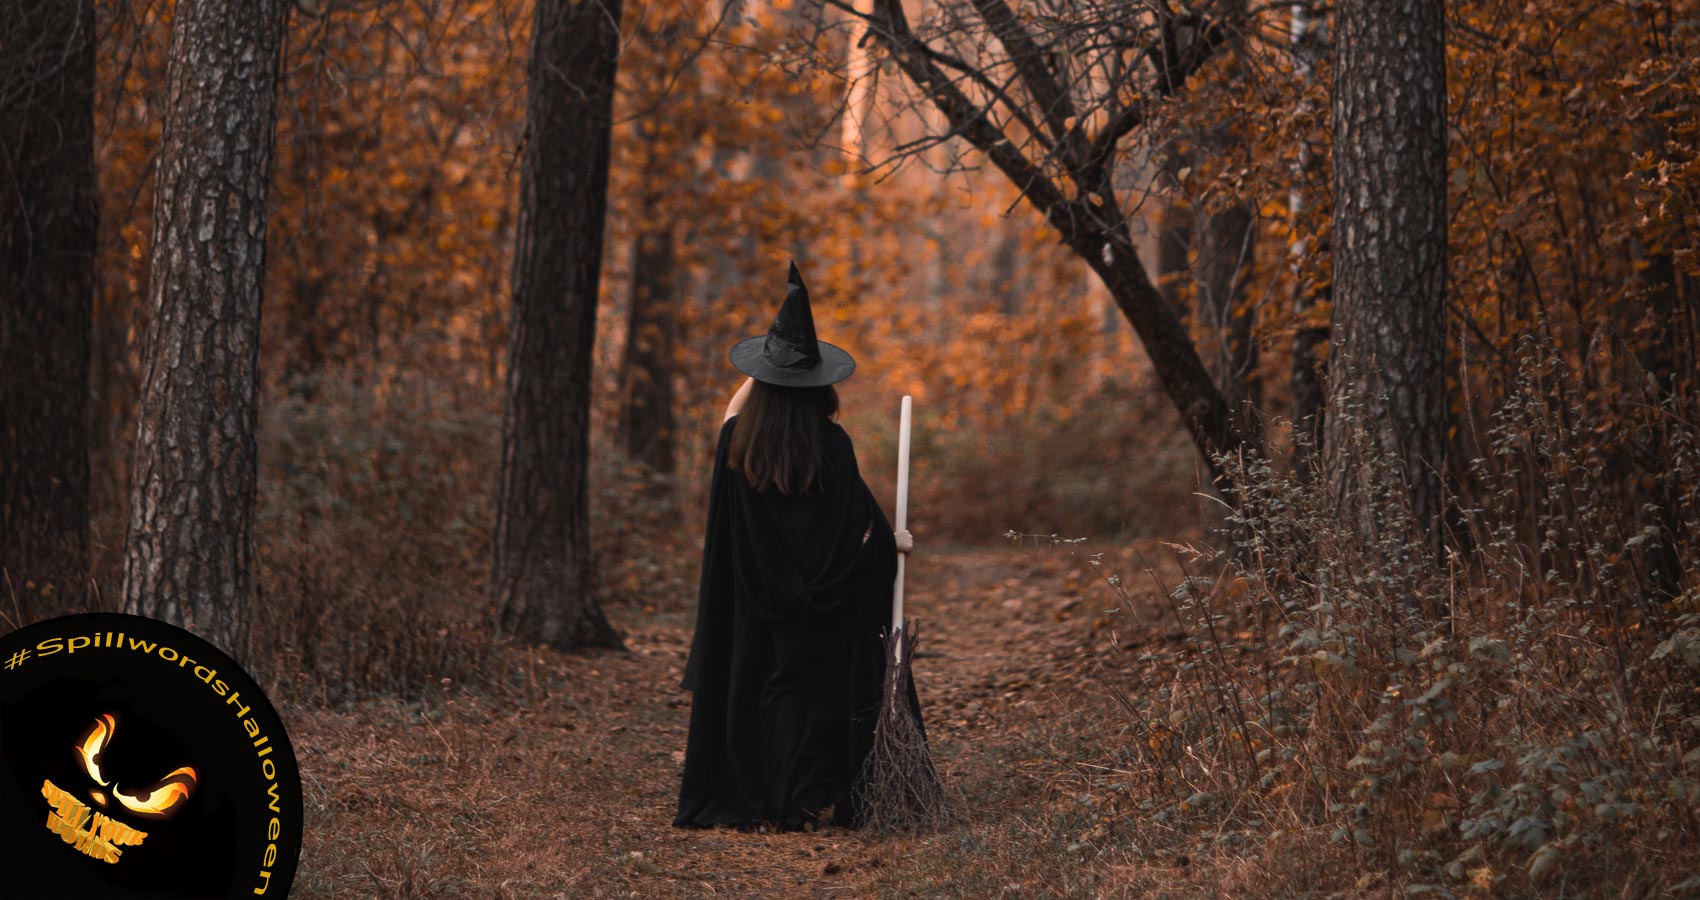 Witchy Halloween, a poem by Michael Lee Johnson at Spillwords.com